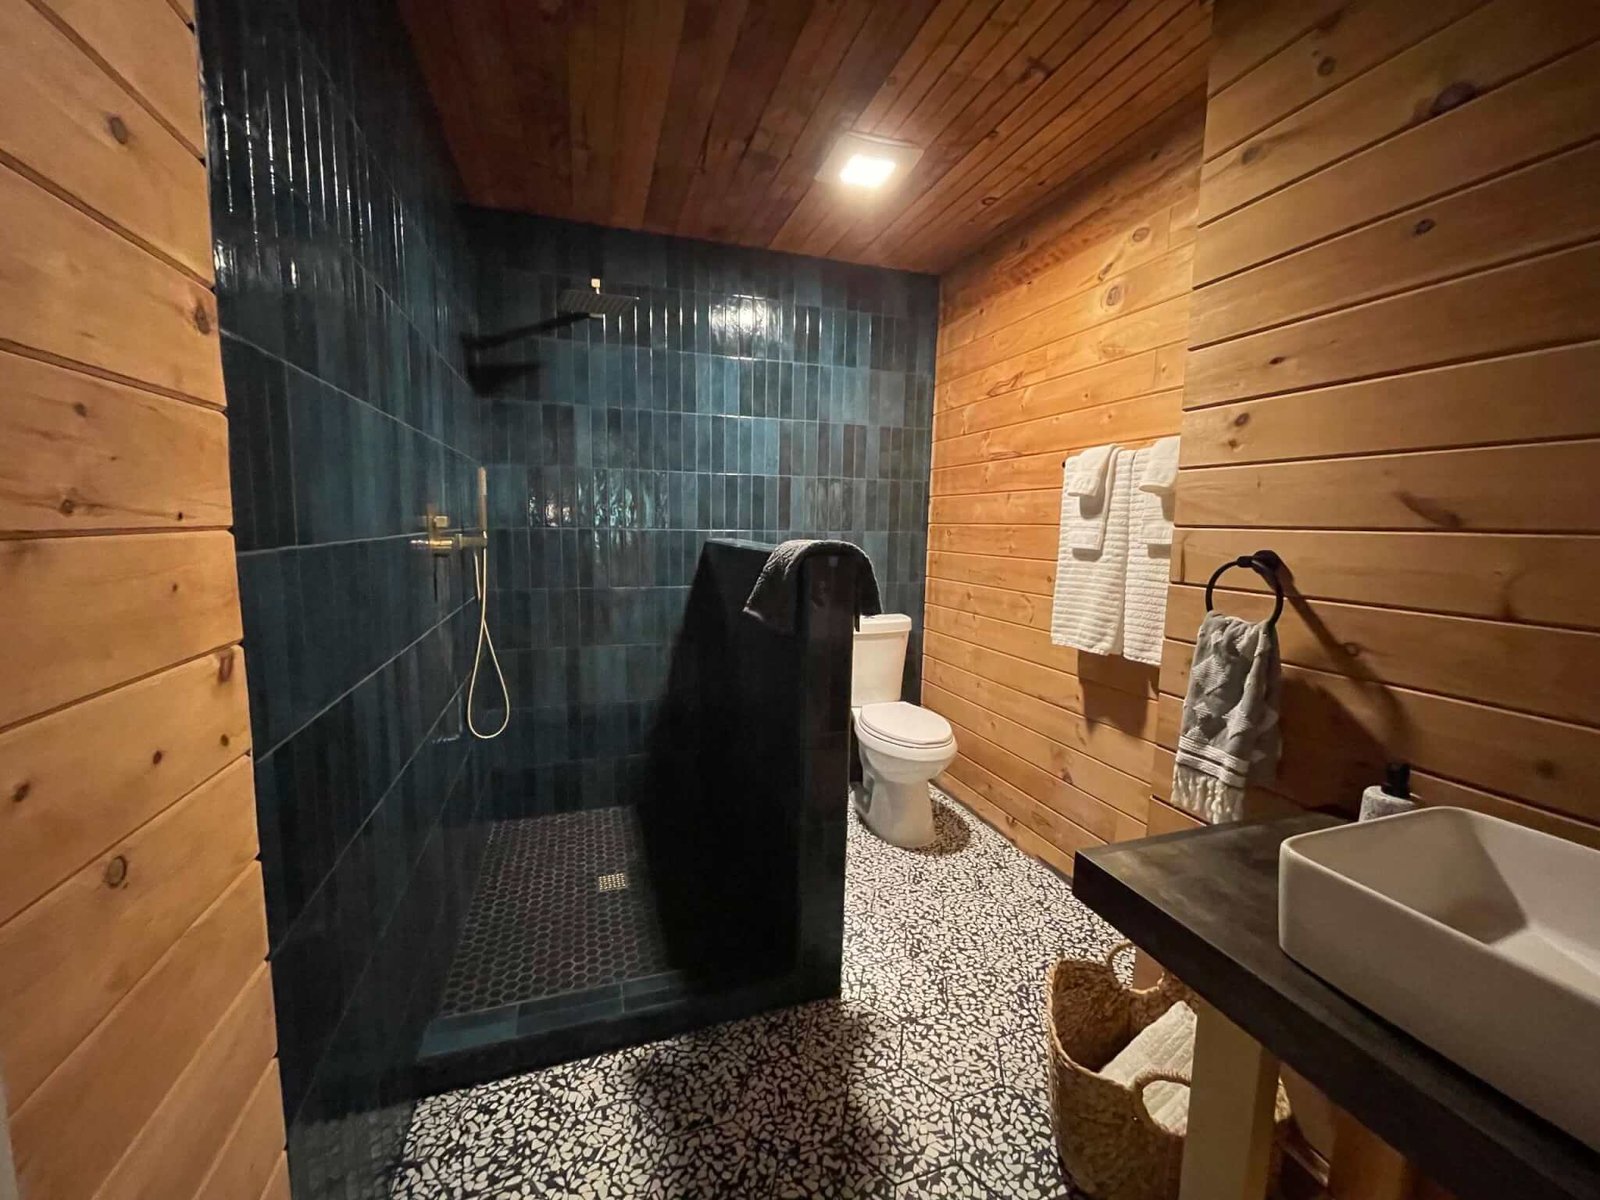 Bathroom with a walk-in rain shower with a spa-like experience.